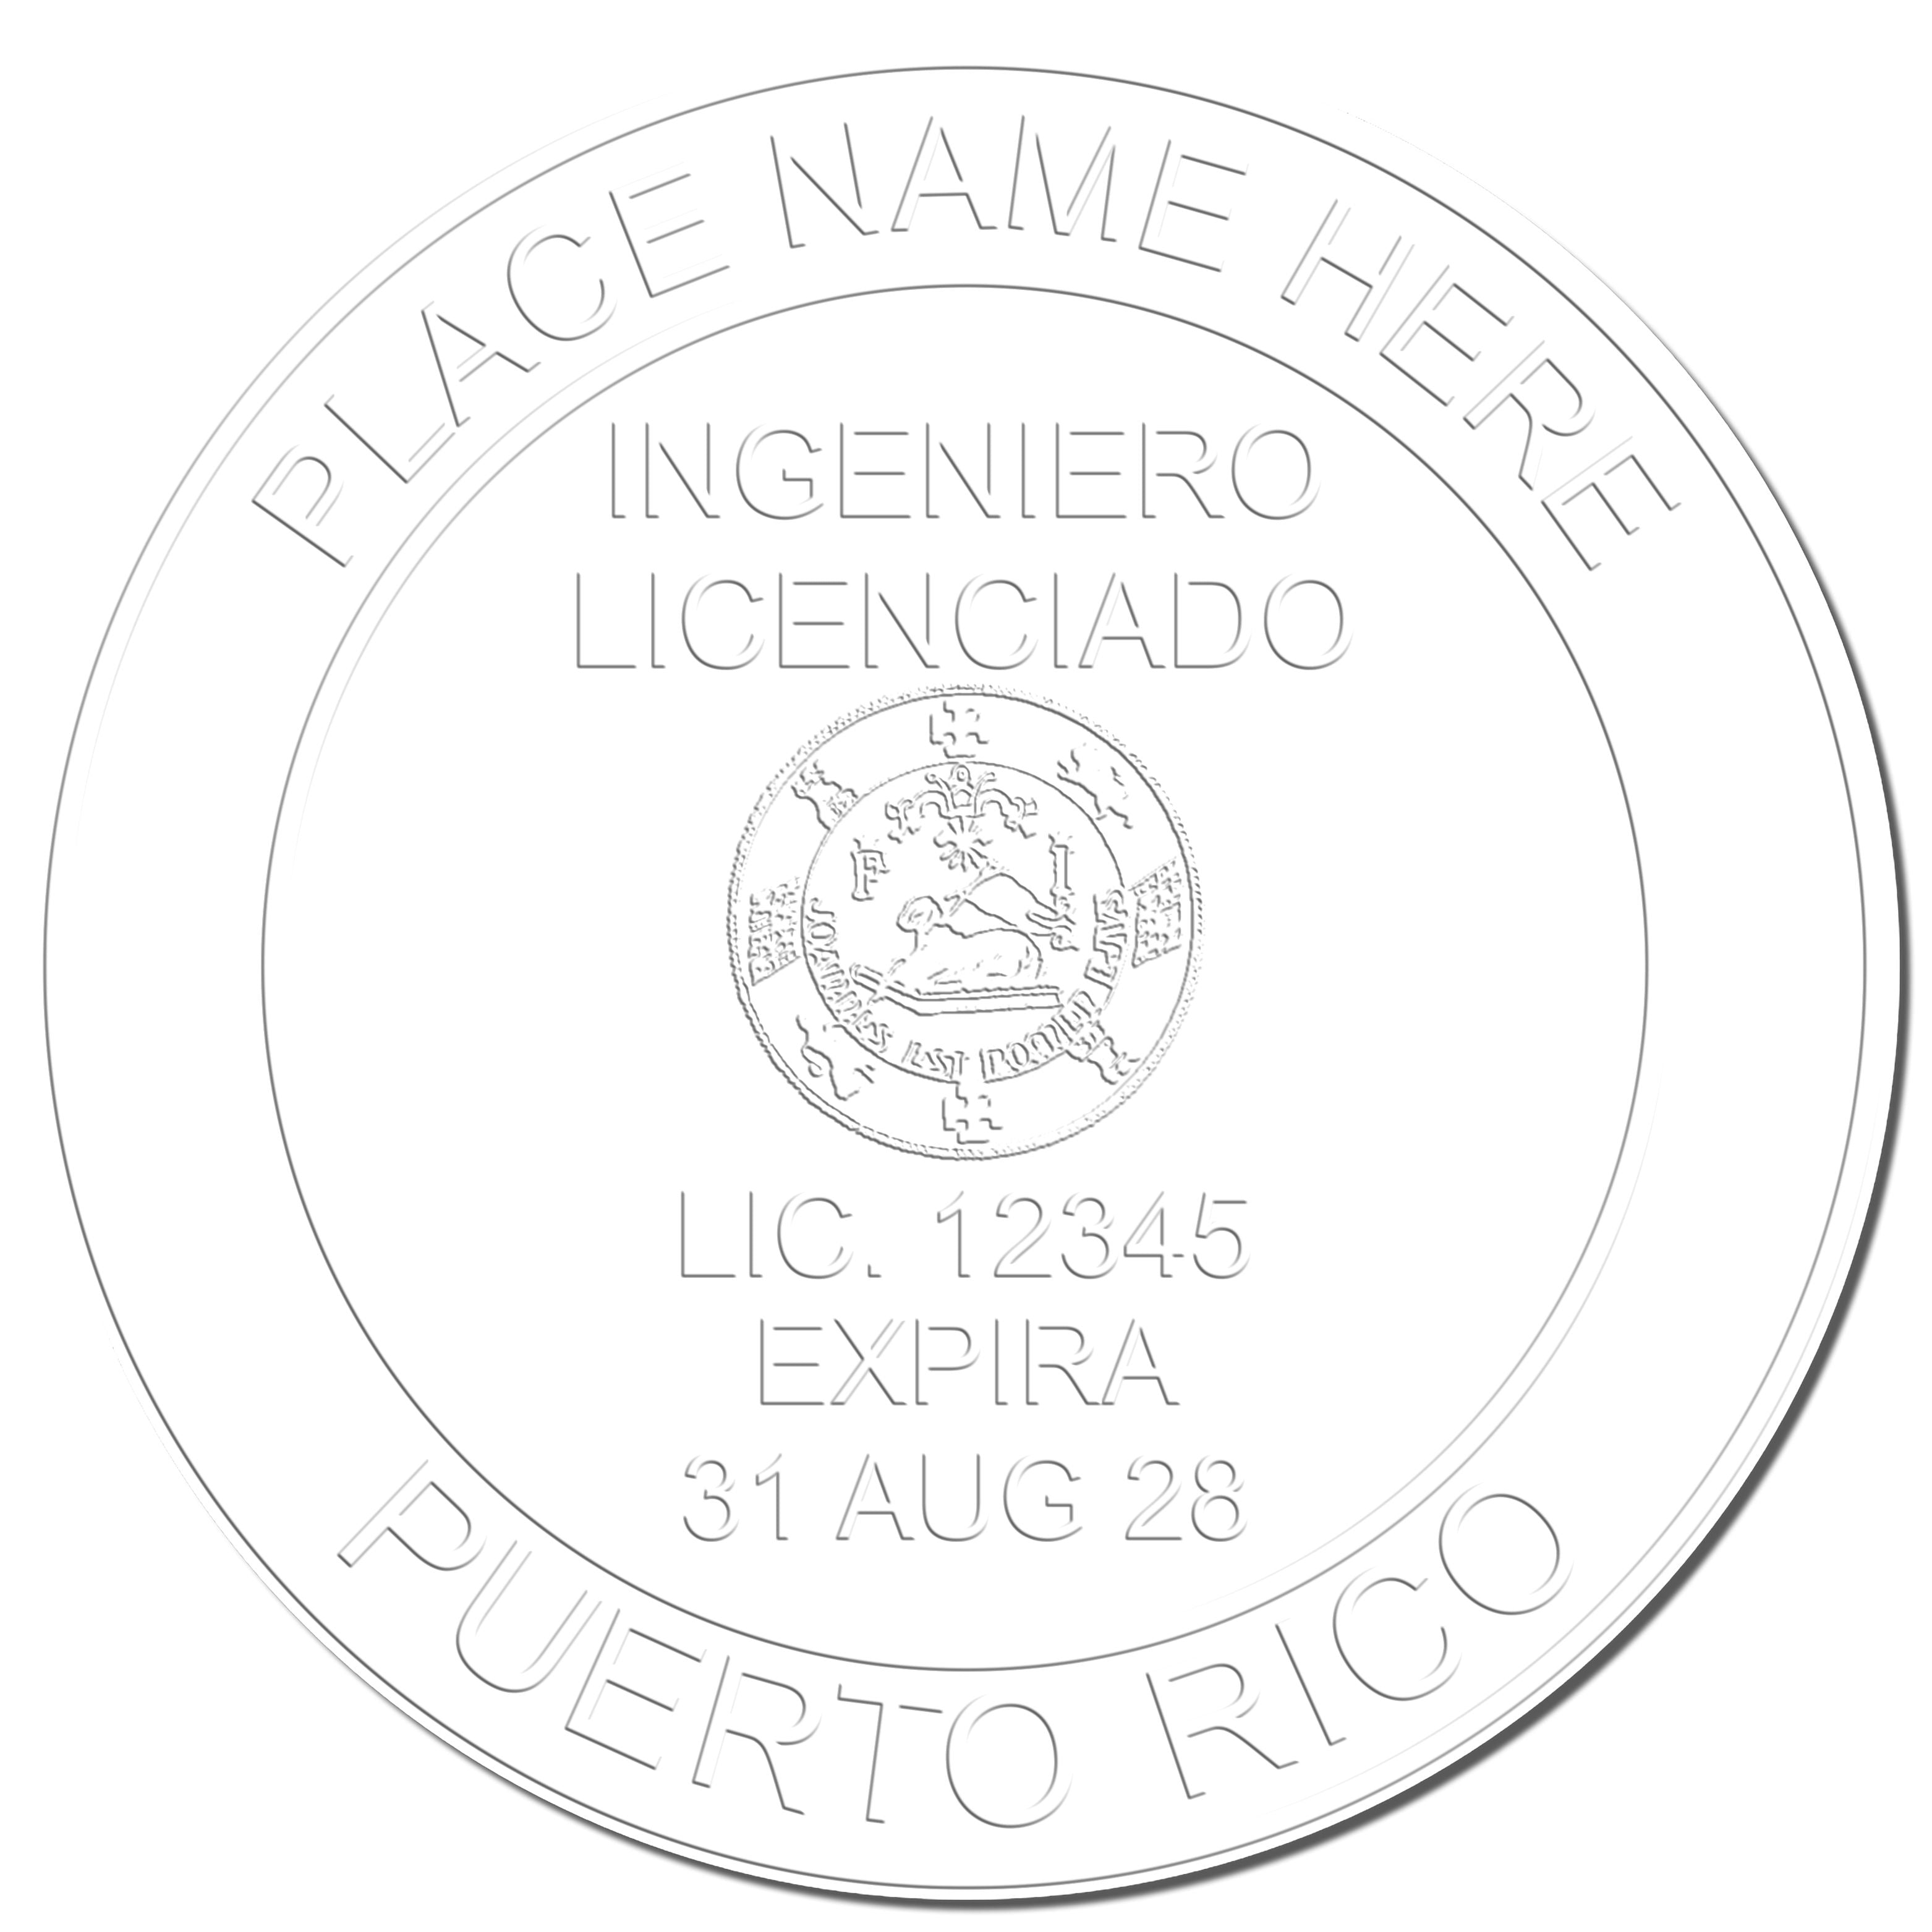 Another Example of a stamped impression of the Puerto Rico Engineer Desk Seal on a piece of office paper.